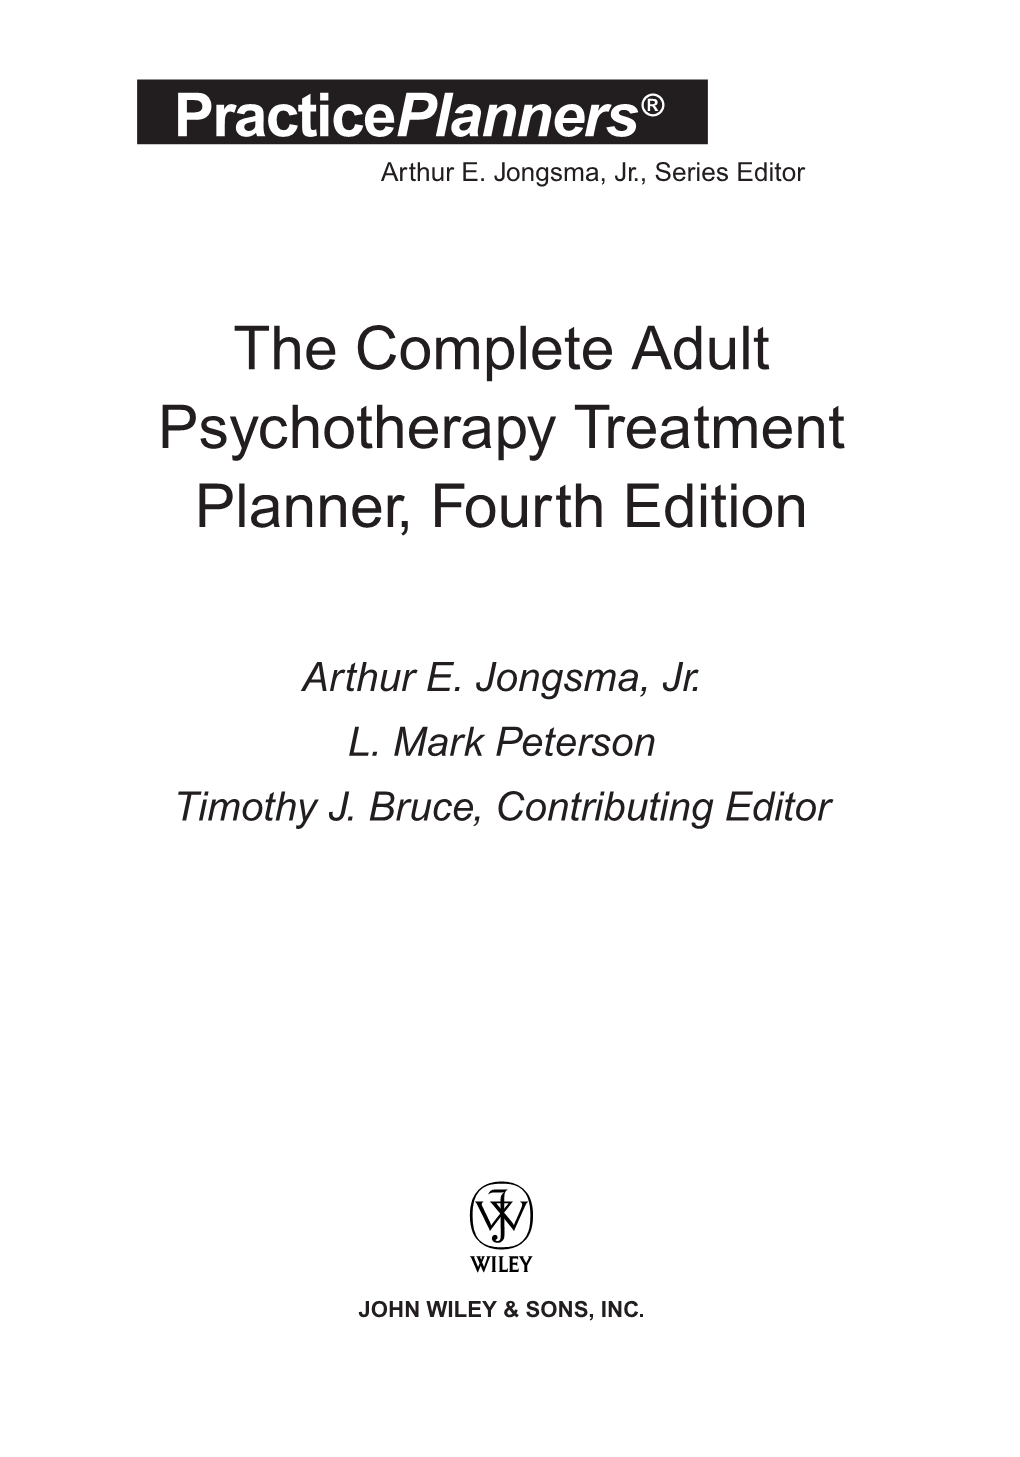 The Complete Adult Psychotherapy Treatment Planner, Fourth Edition